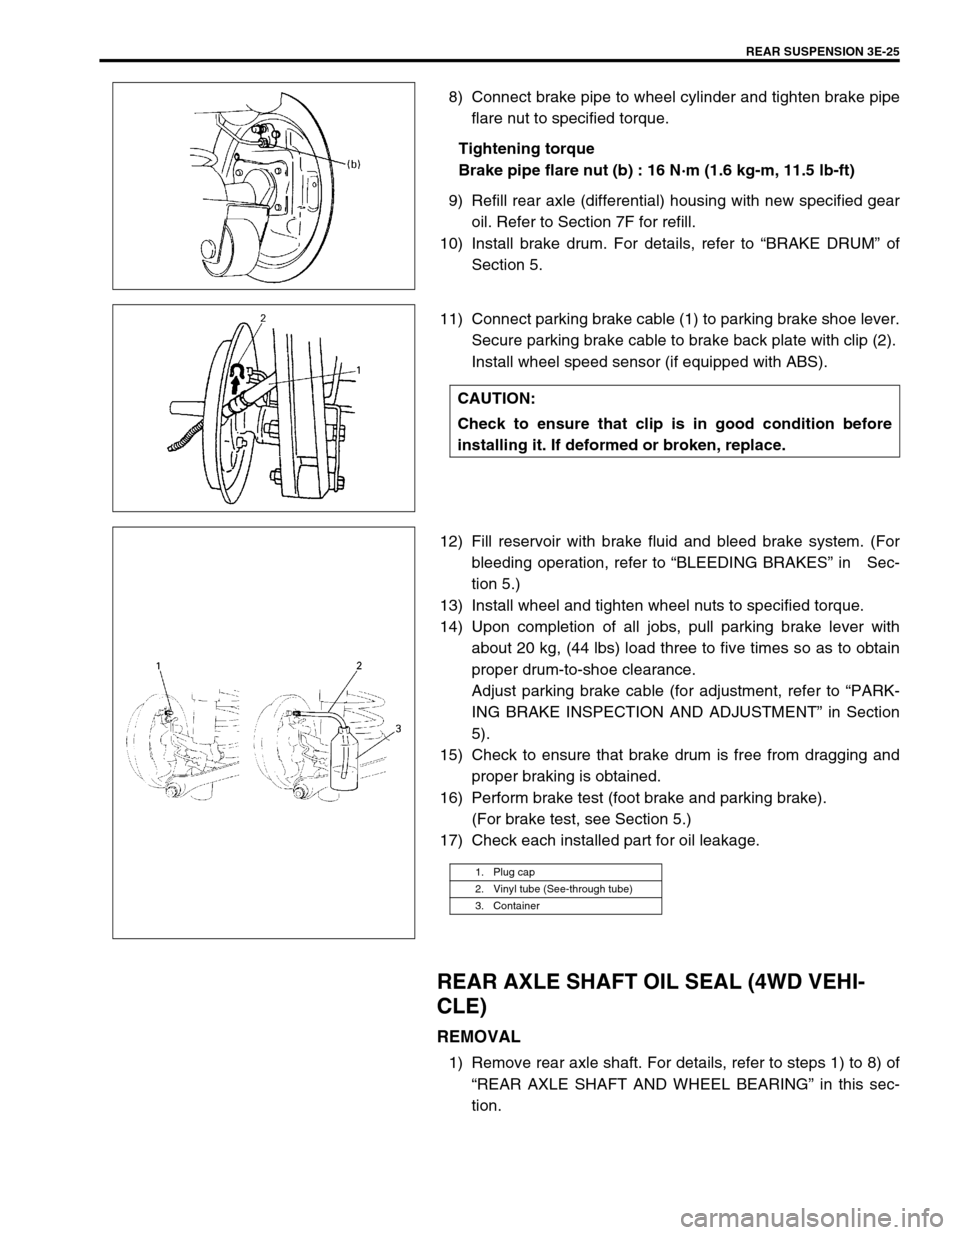 SUZUKI SWIFT 2000 1.G RG413 Service Owners Manual REAR SUSPENSION 3E-25
8) Connect brake pipe to wheel cylinder and tighten brake pipe
flare nut to specified torque.
Tightening torque
Brake pipe flare nut (b) : 16 N·m (1.6 kg-m, 11.5 lb-ft)
9) Refil